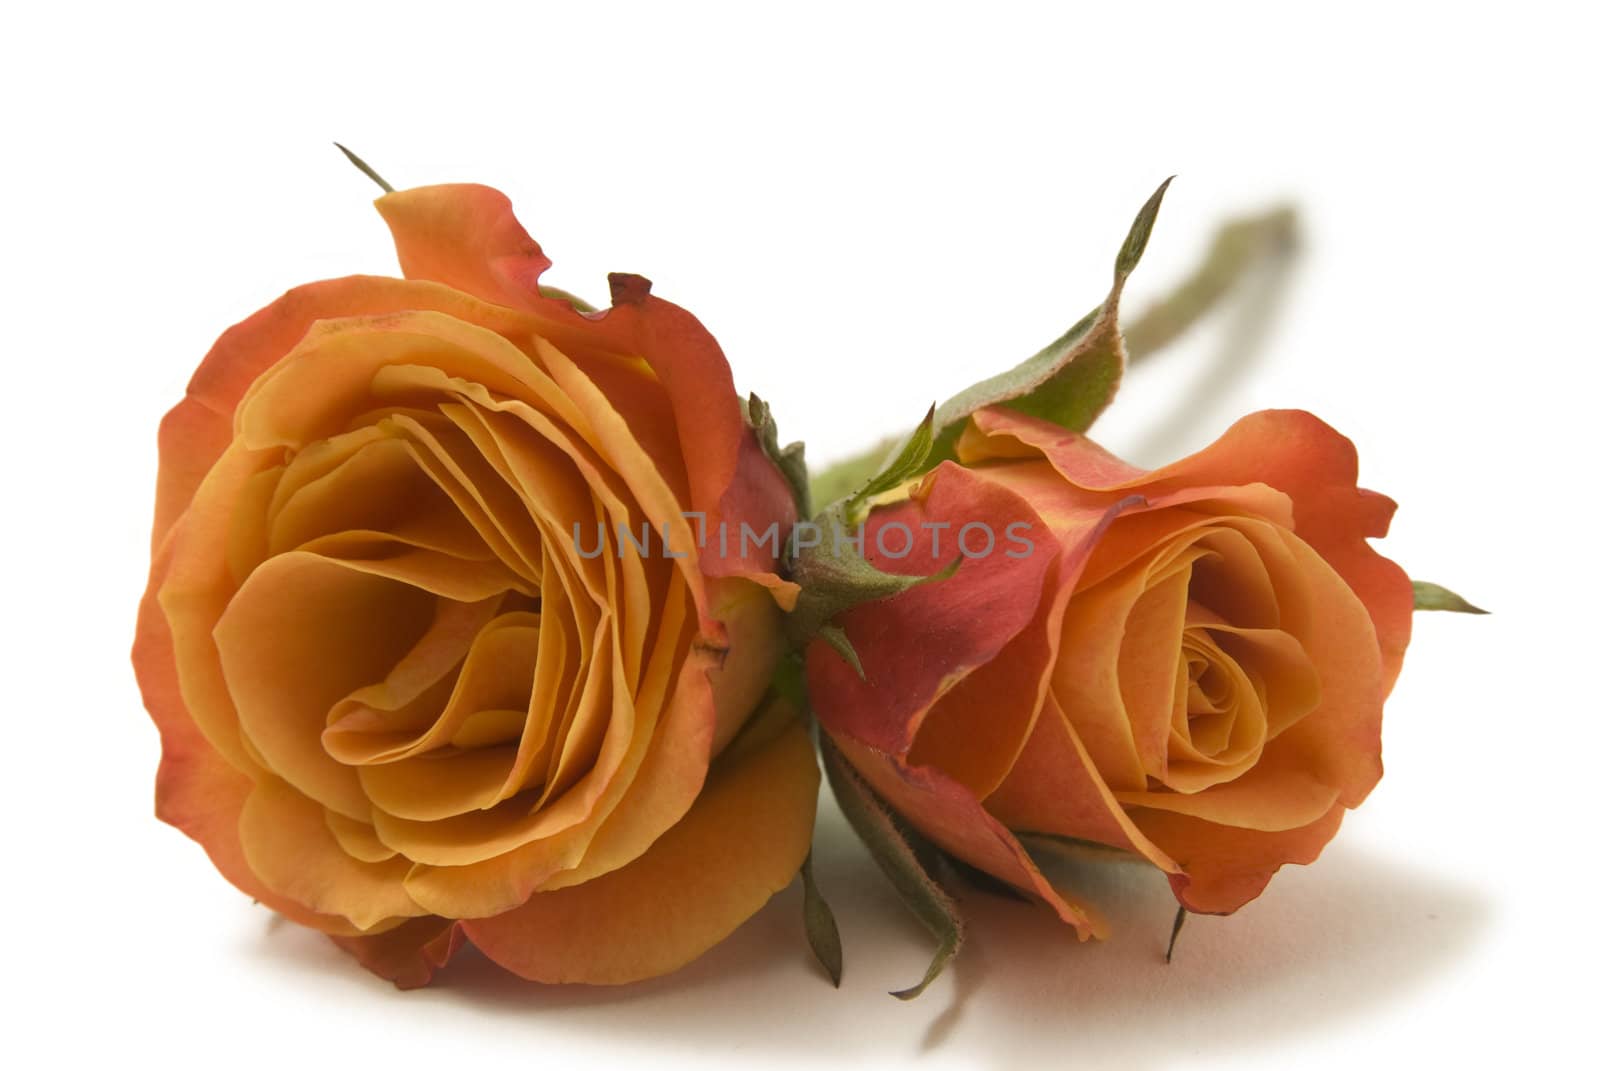 Two orange roses isolated on a white background